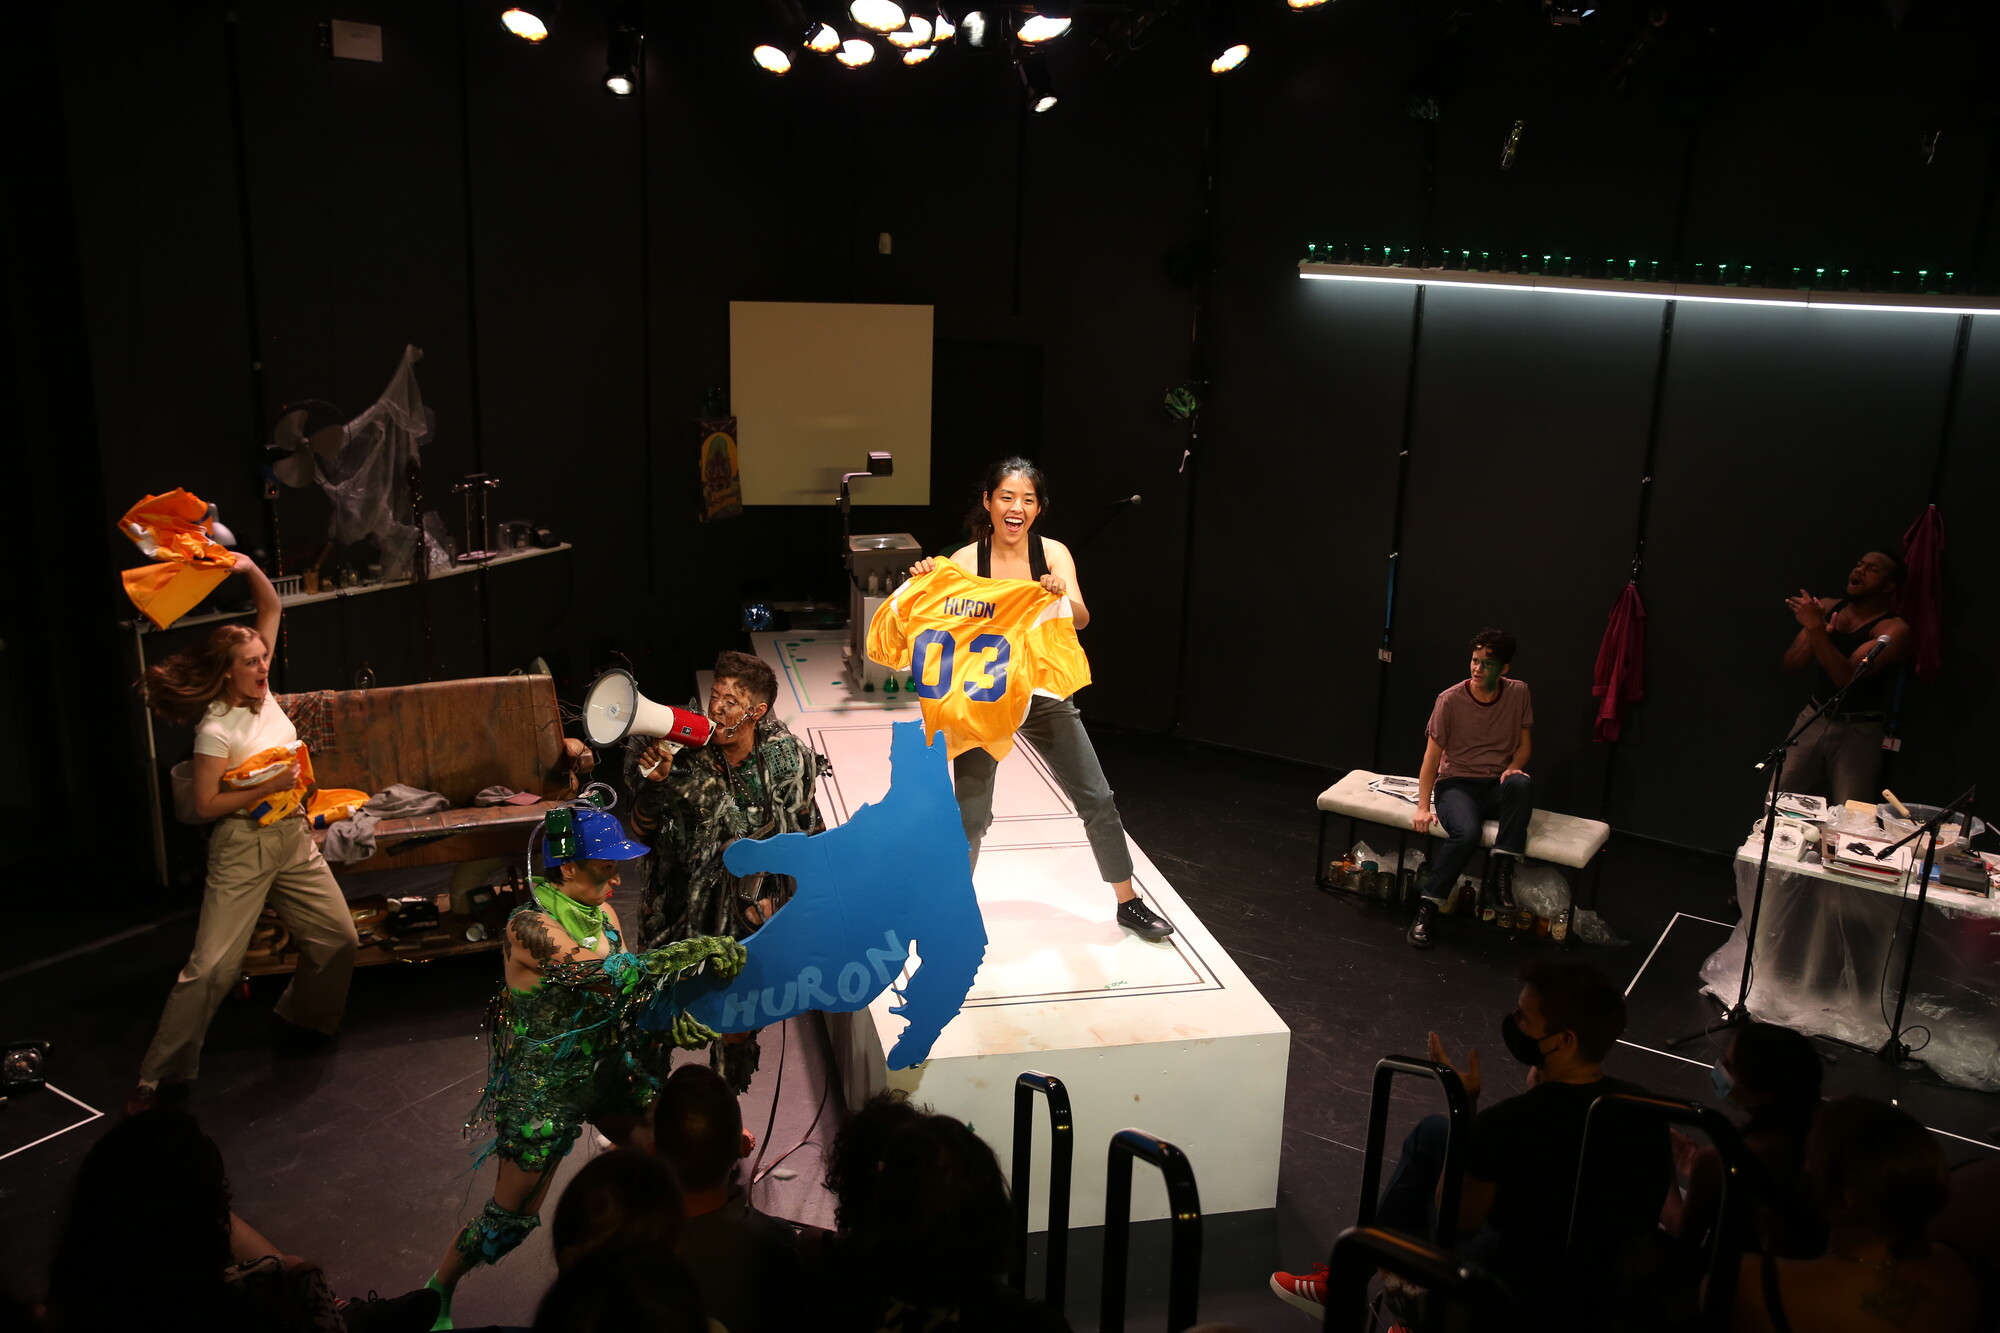 A performer holds up a prop version of Lake Huron while another dances with a sports jersey with "Huron" on the back and a third yells into a megaphone.